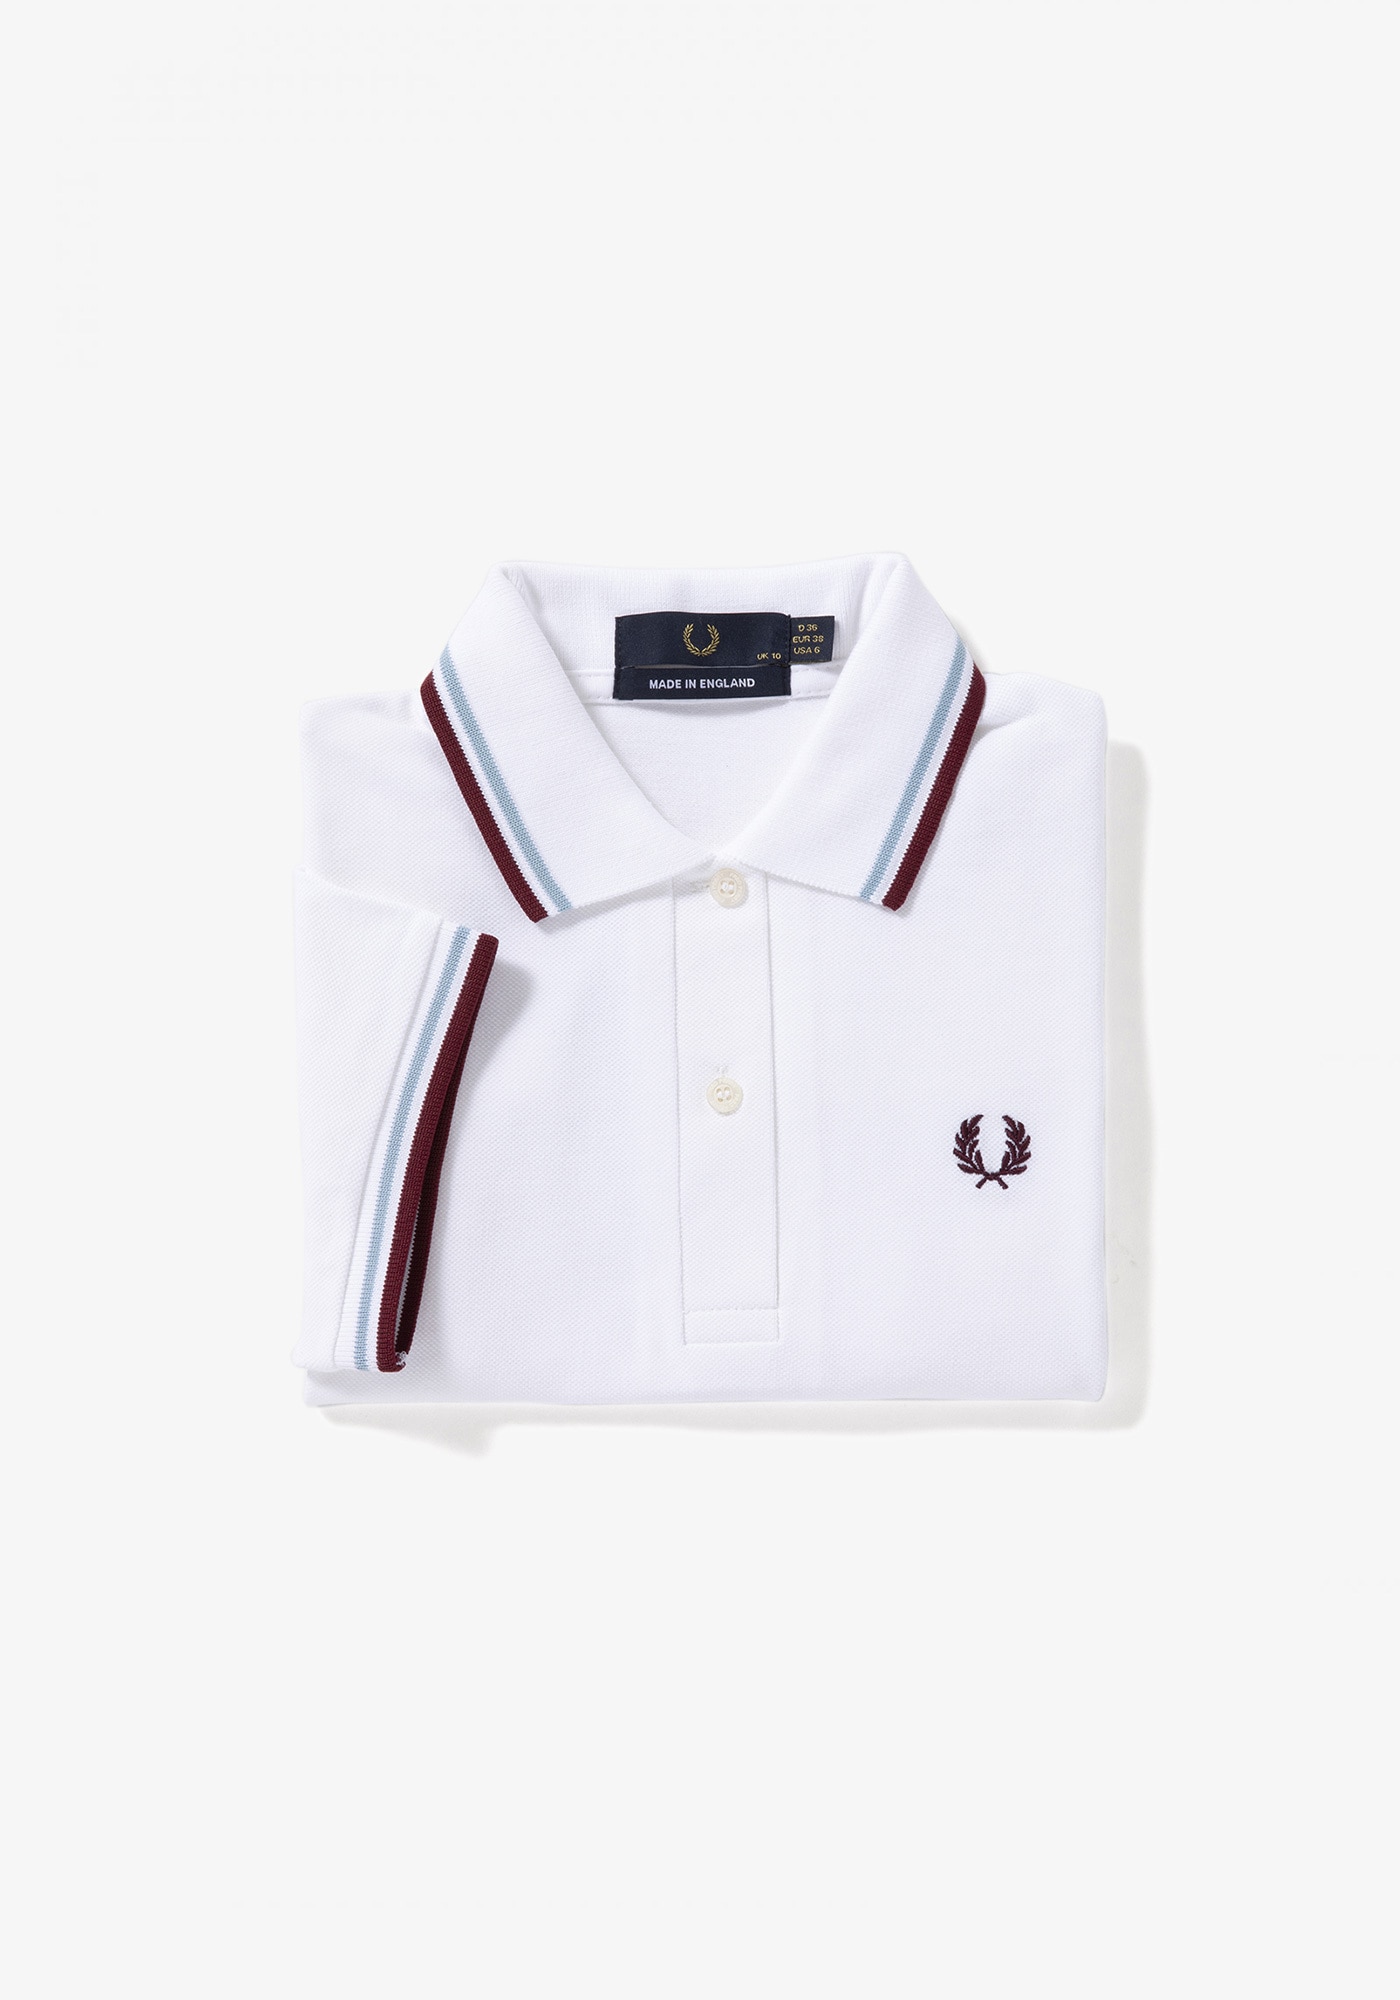 The Fred Perry Shirt - G12